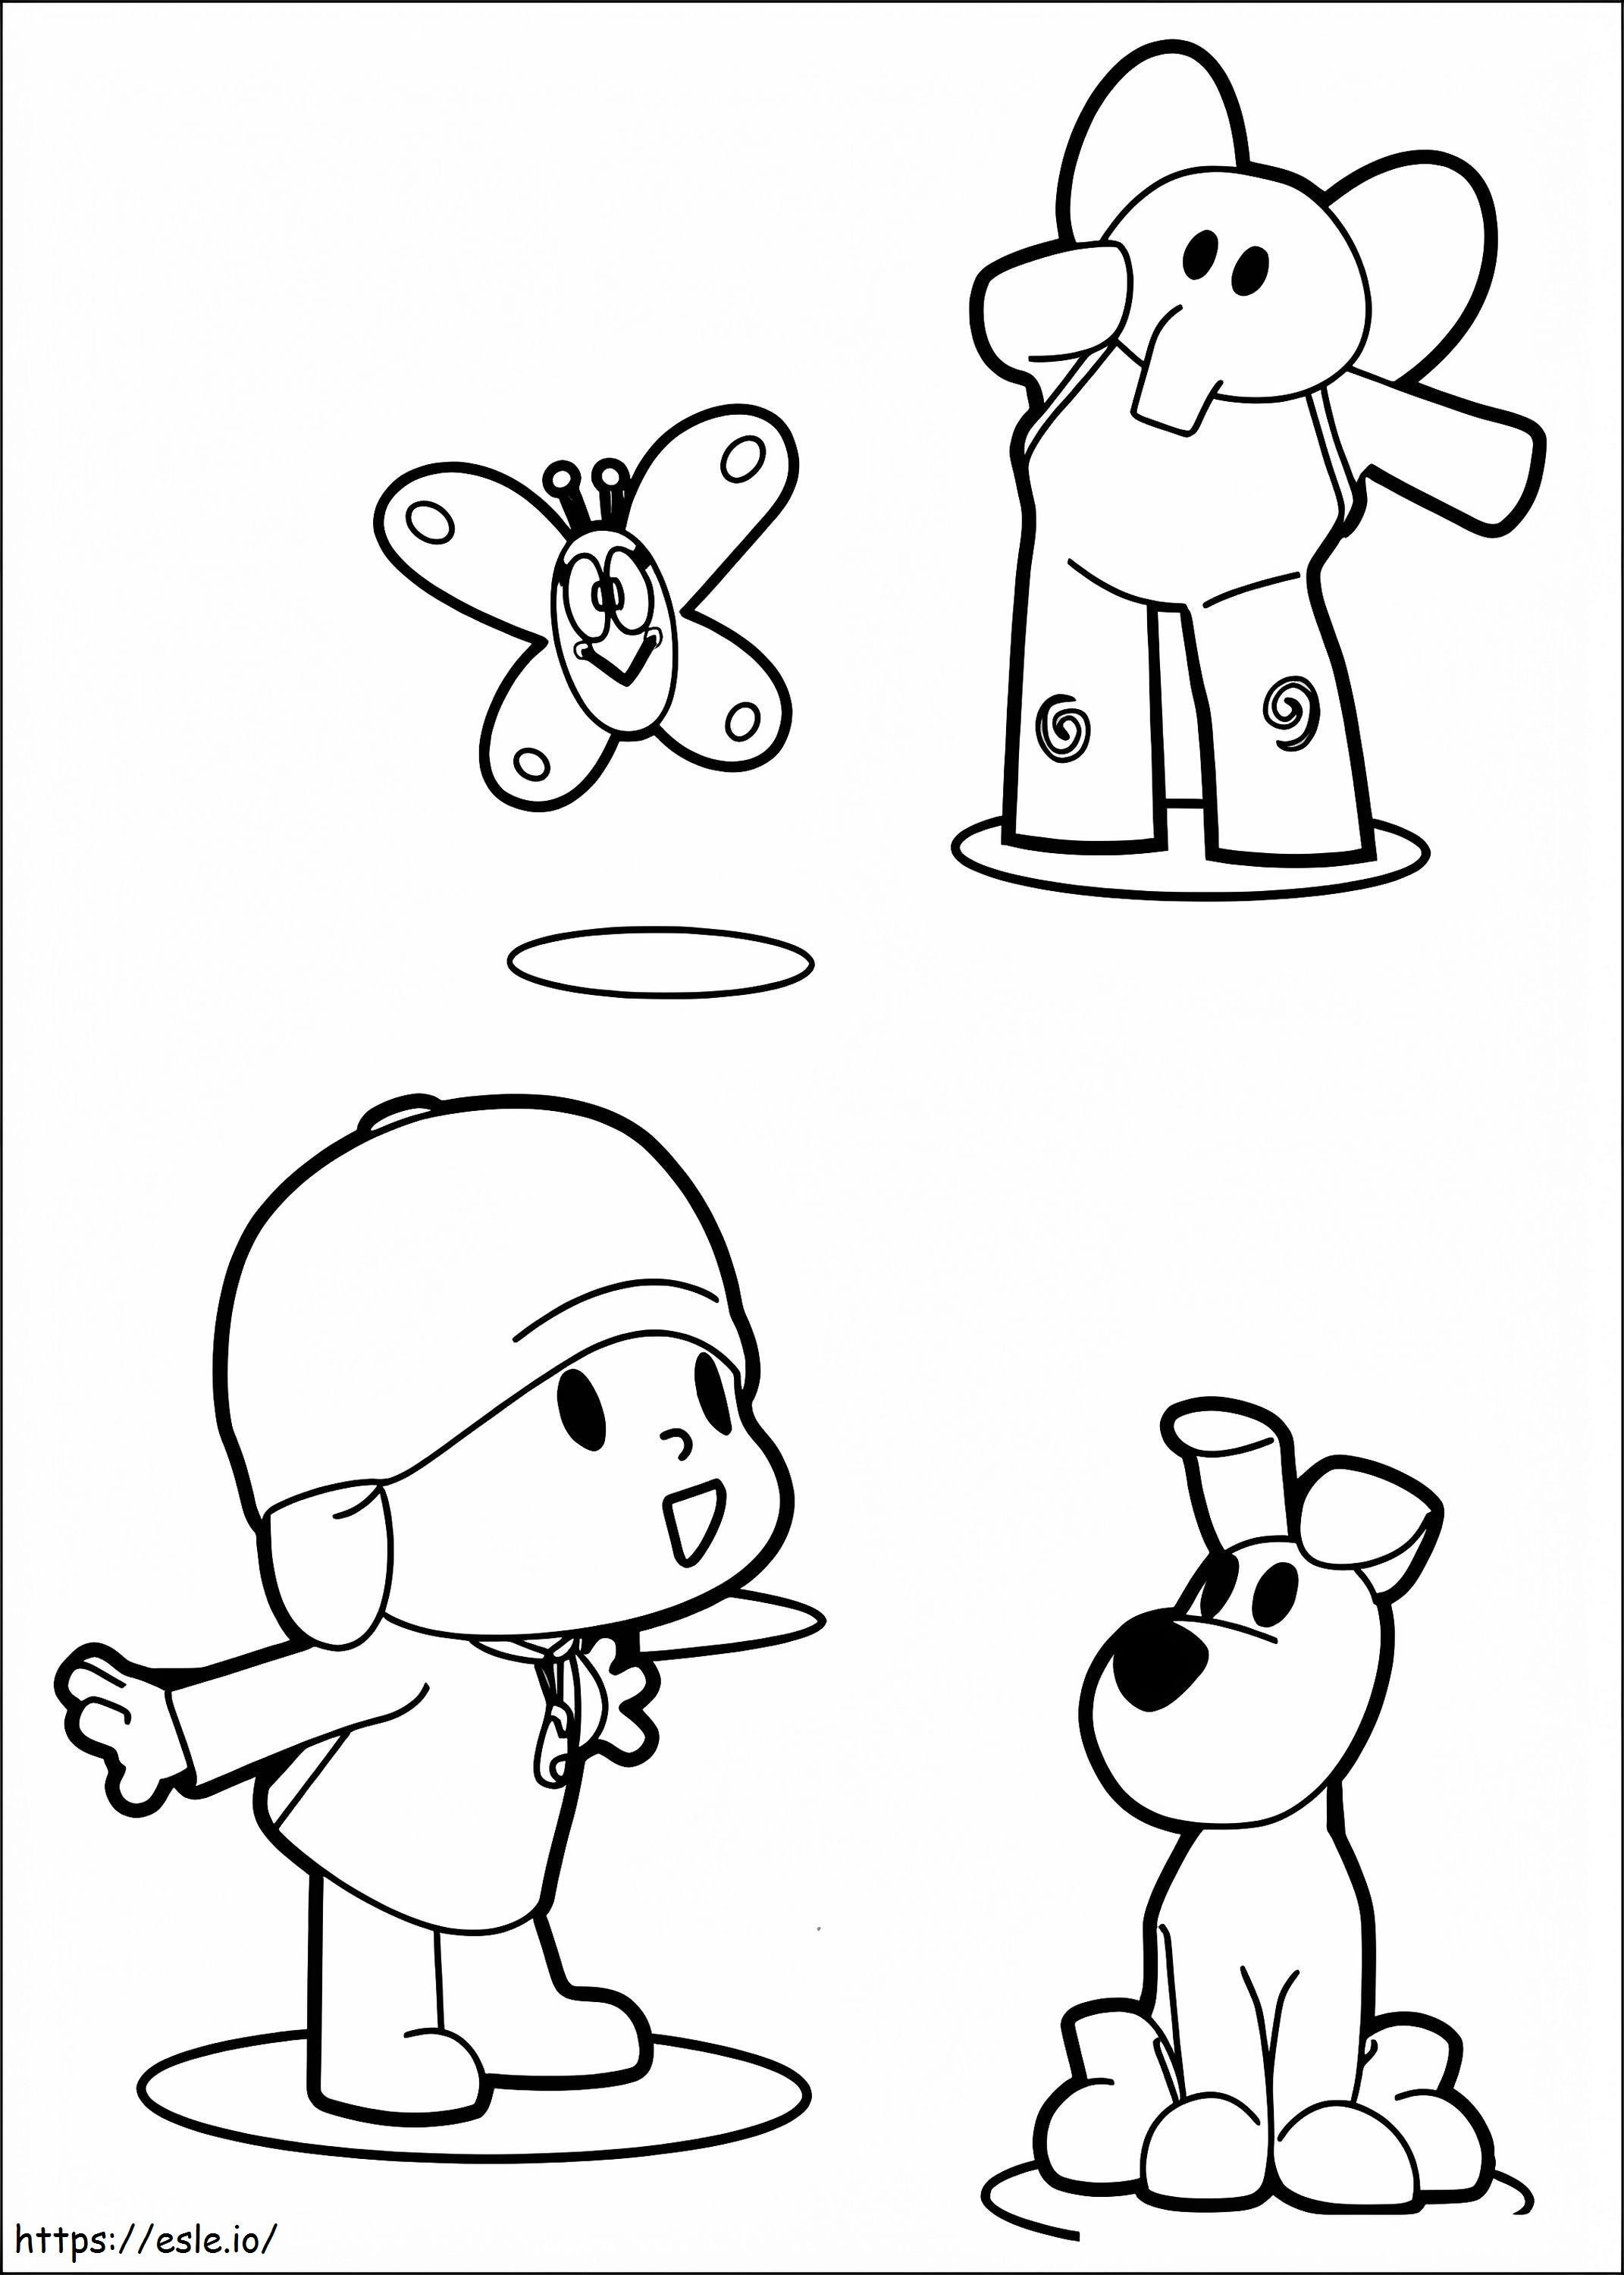 With Pocoyo coloring page